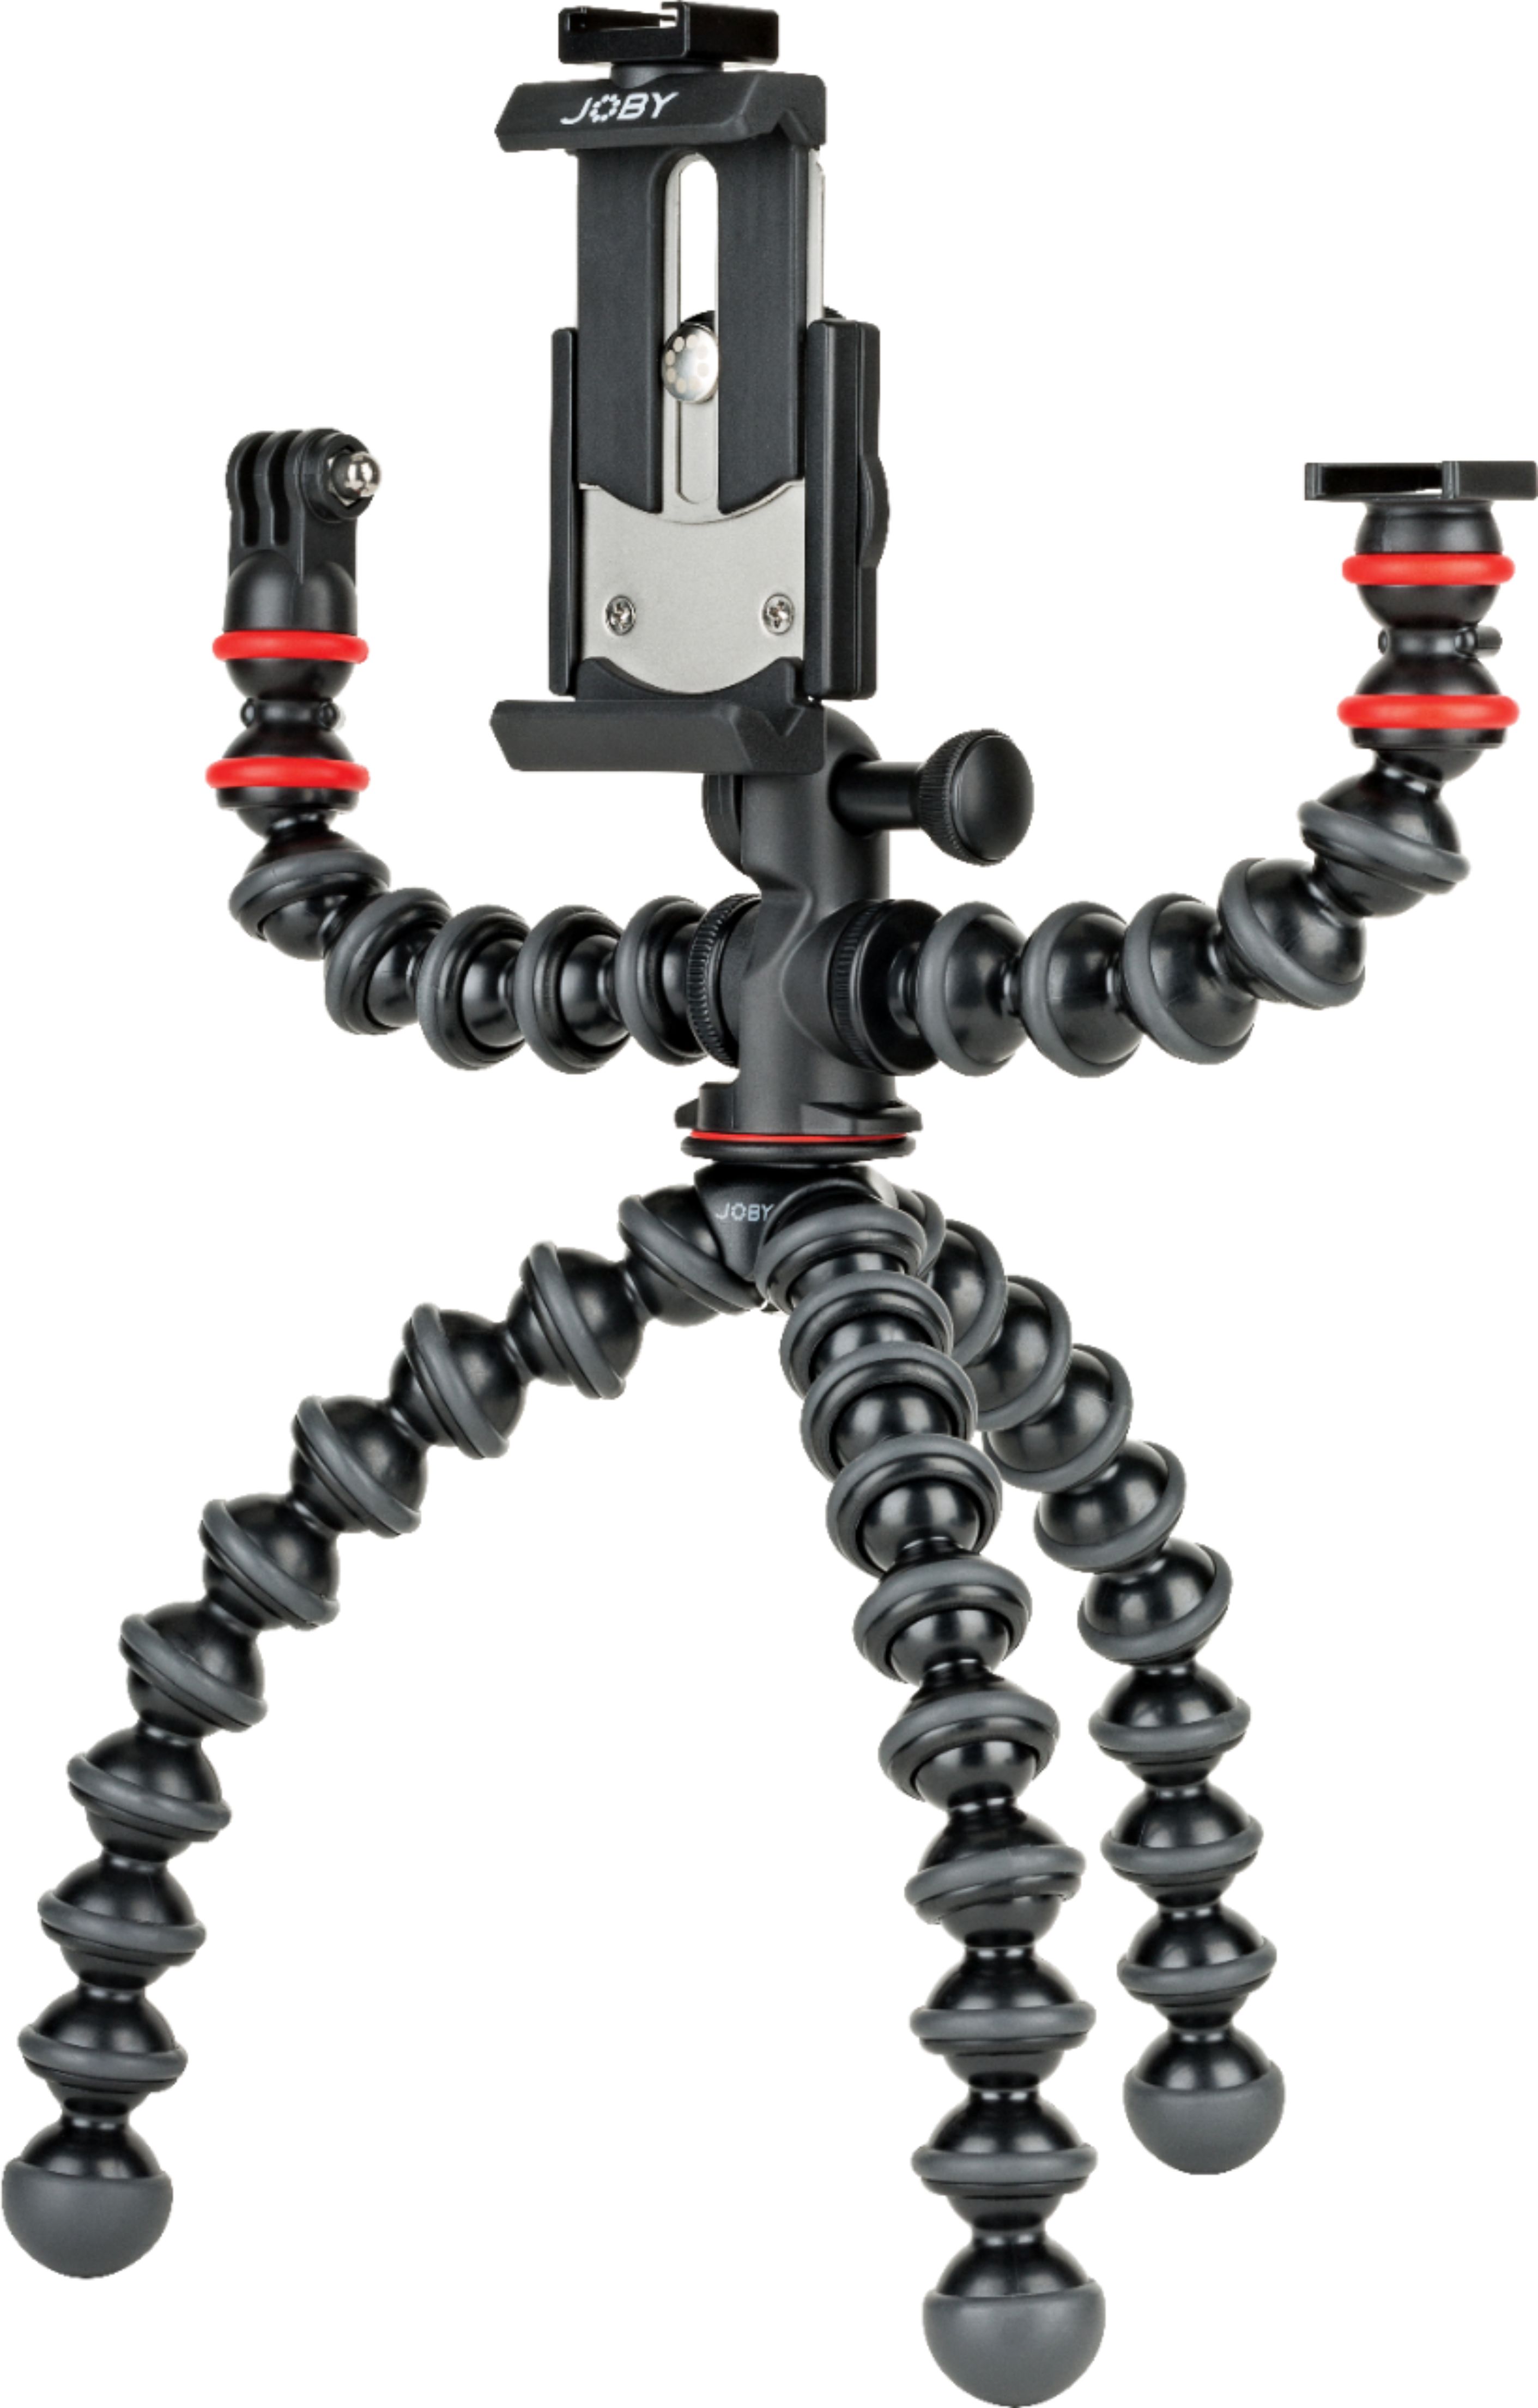 Angle View: JOBY - GorillaPod Mobile Rig Tripod for Mobile Phones - Red/Black